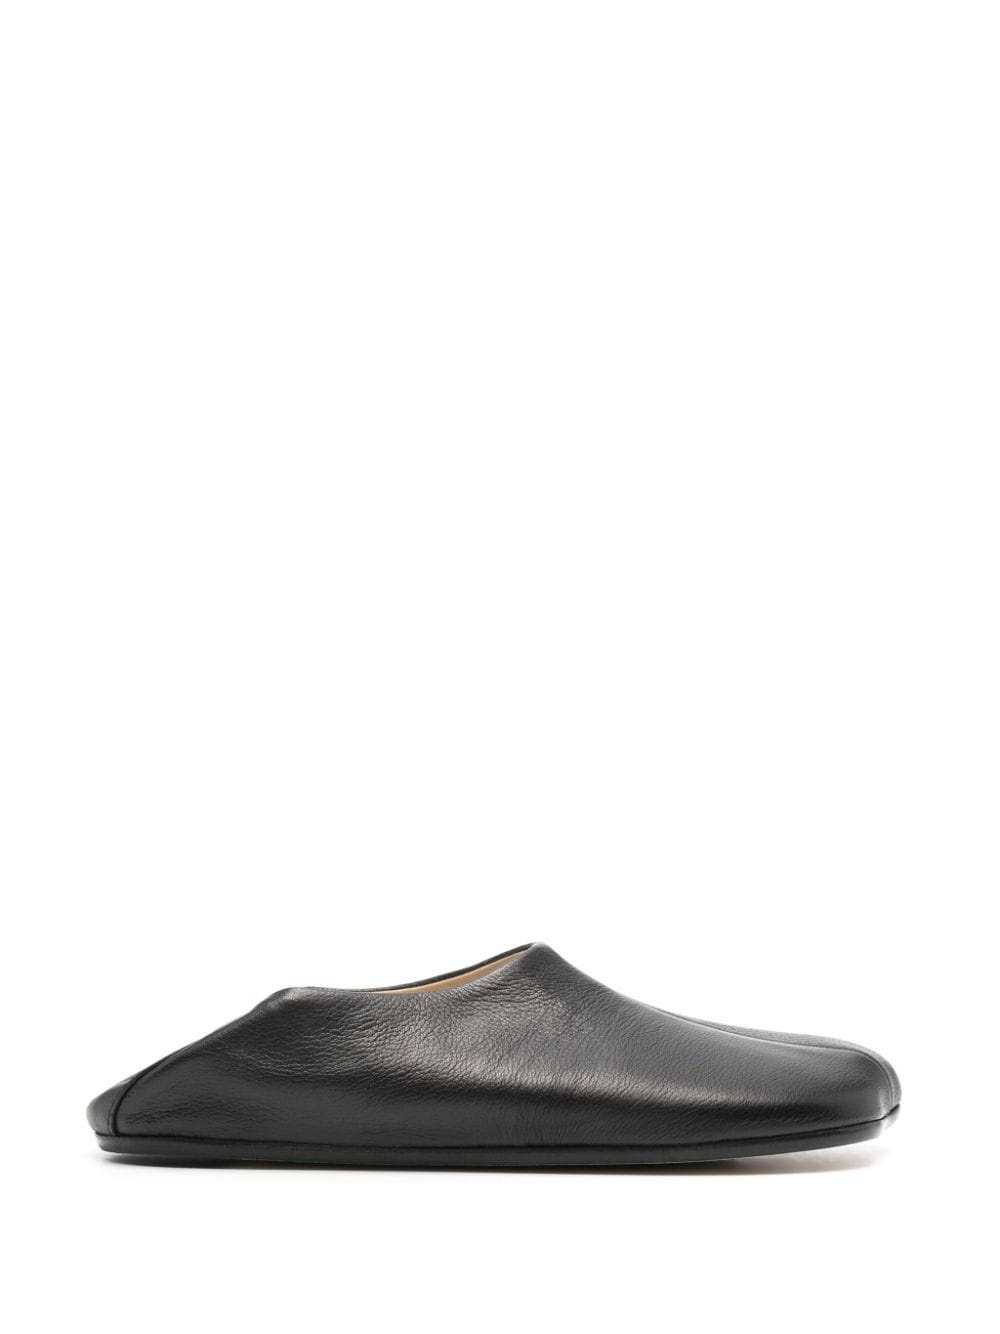 Anatomic leather slippers - 5